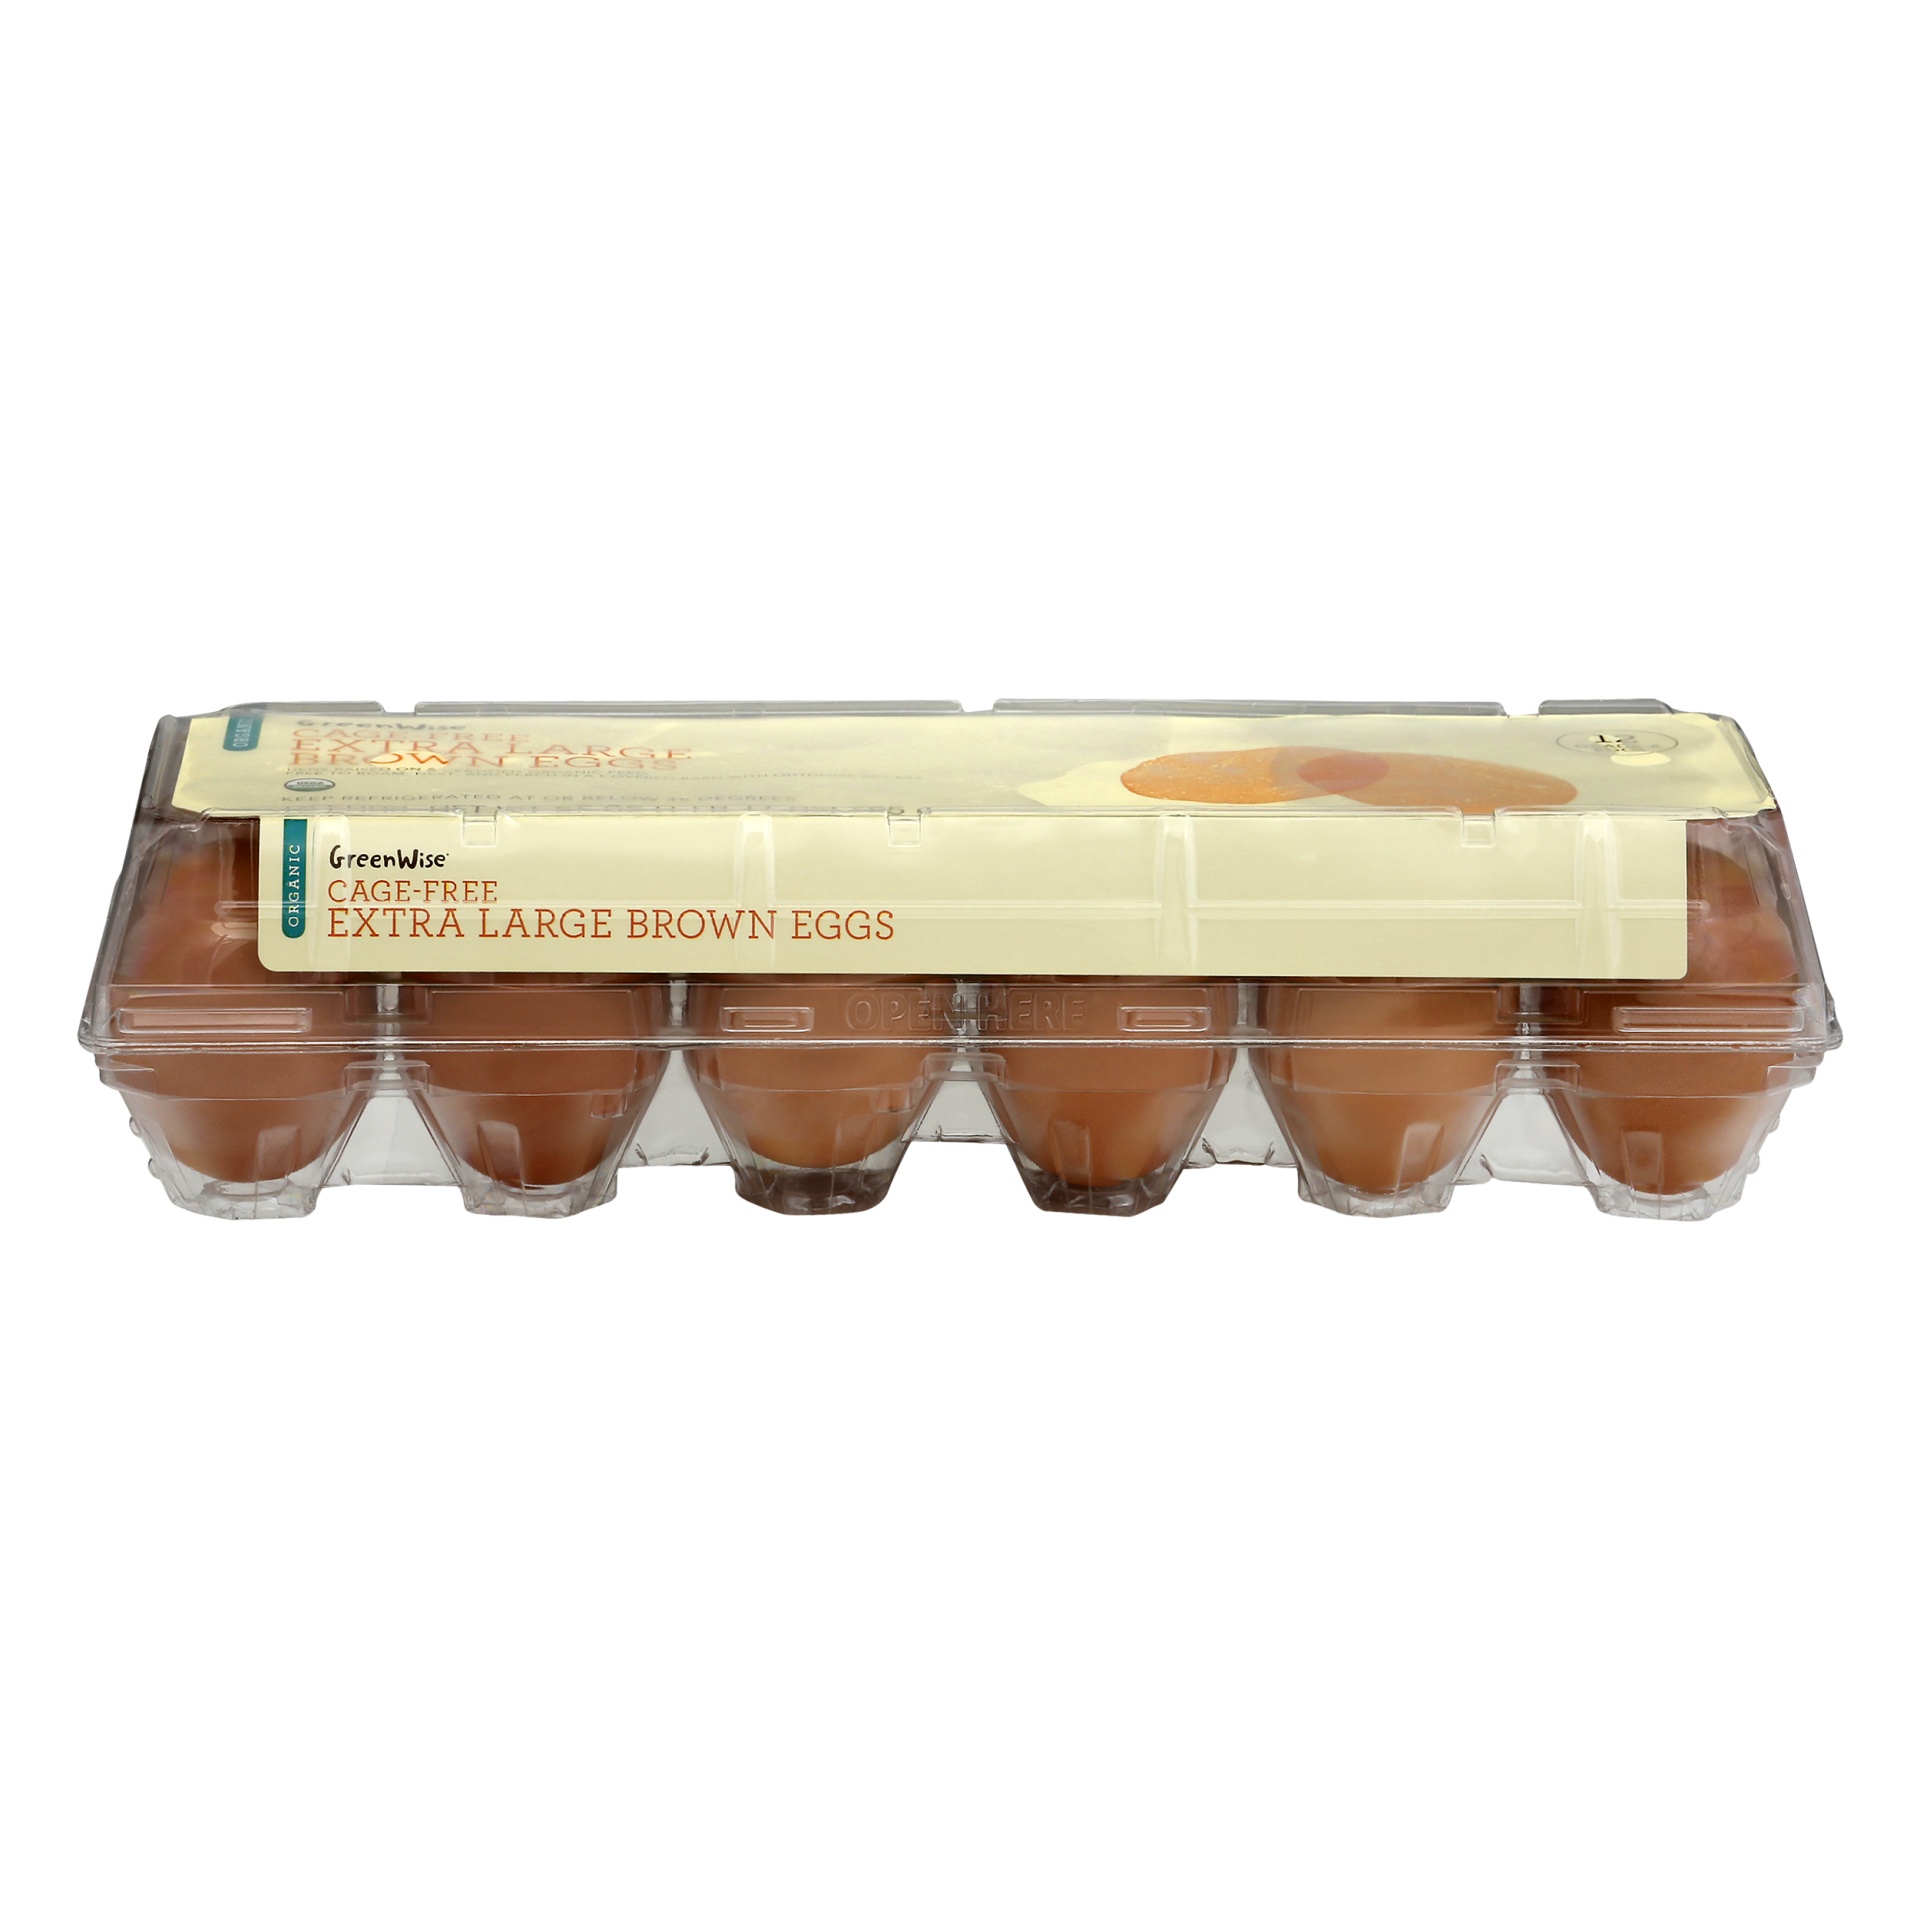 slide 1 of 1, GreenWise Organic Cage-Free Extra Large Brown Eggs, 12 ct